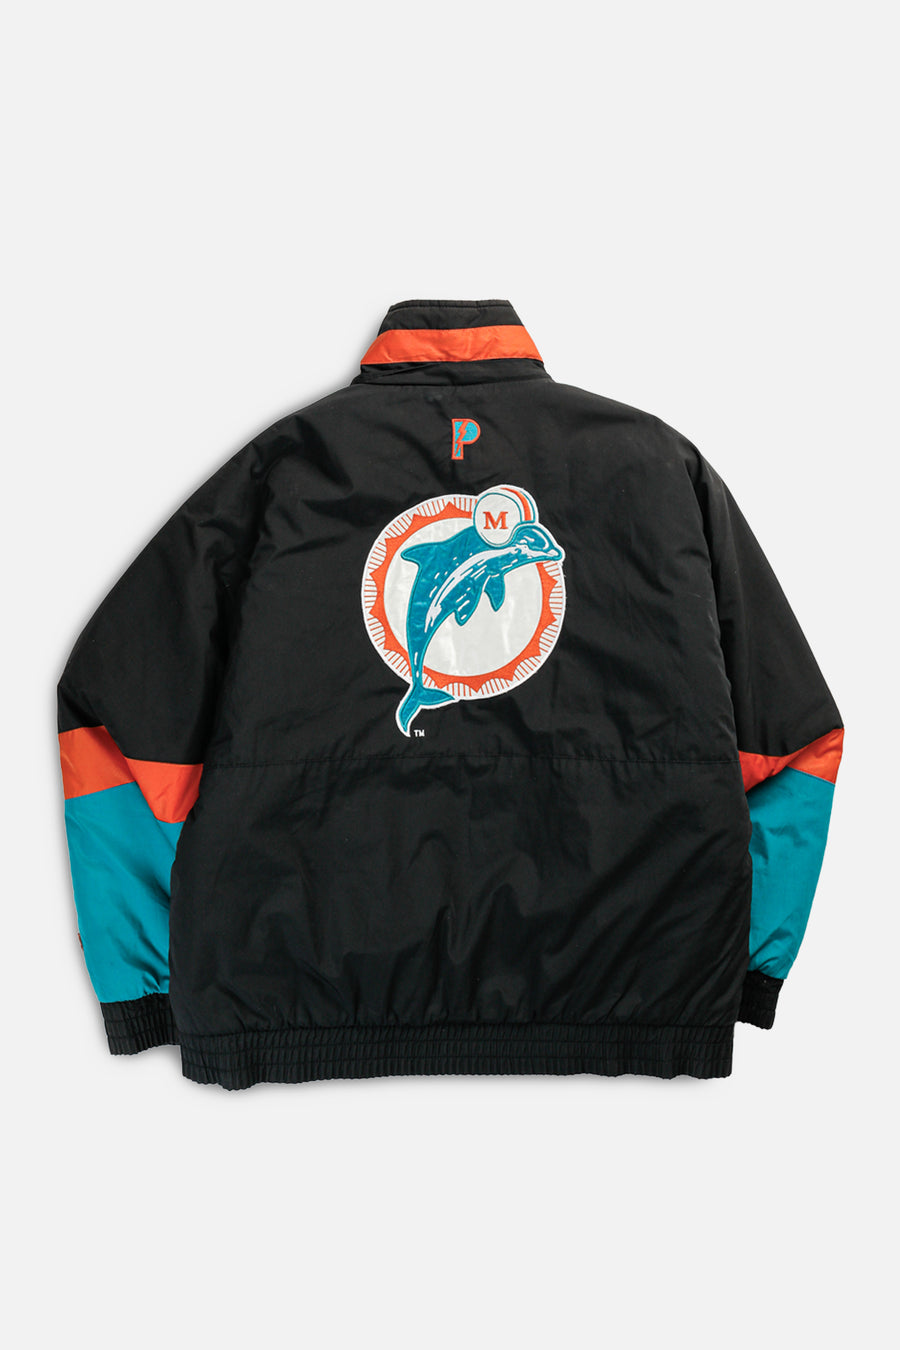 Vintage Miami Dolphins NFL Reversible Puffer Jacket - L